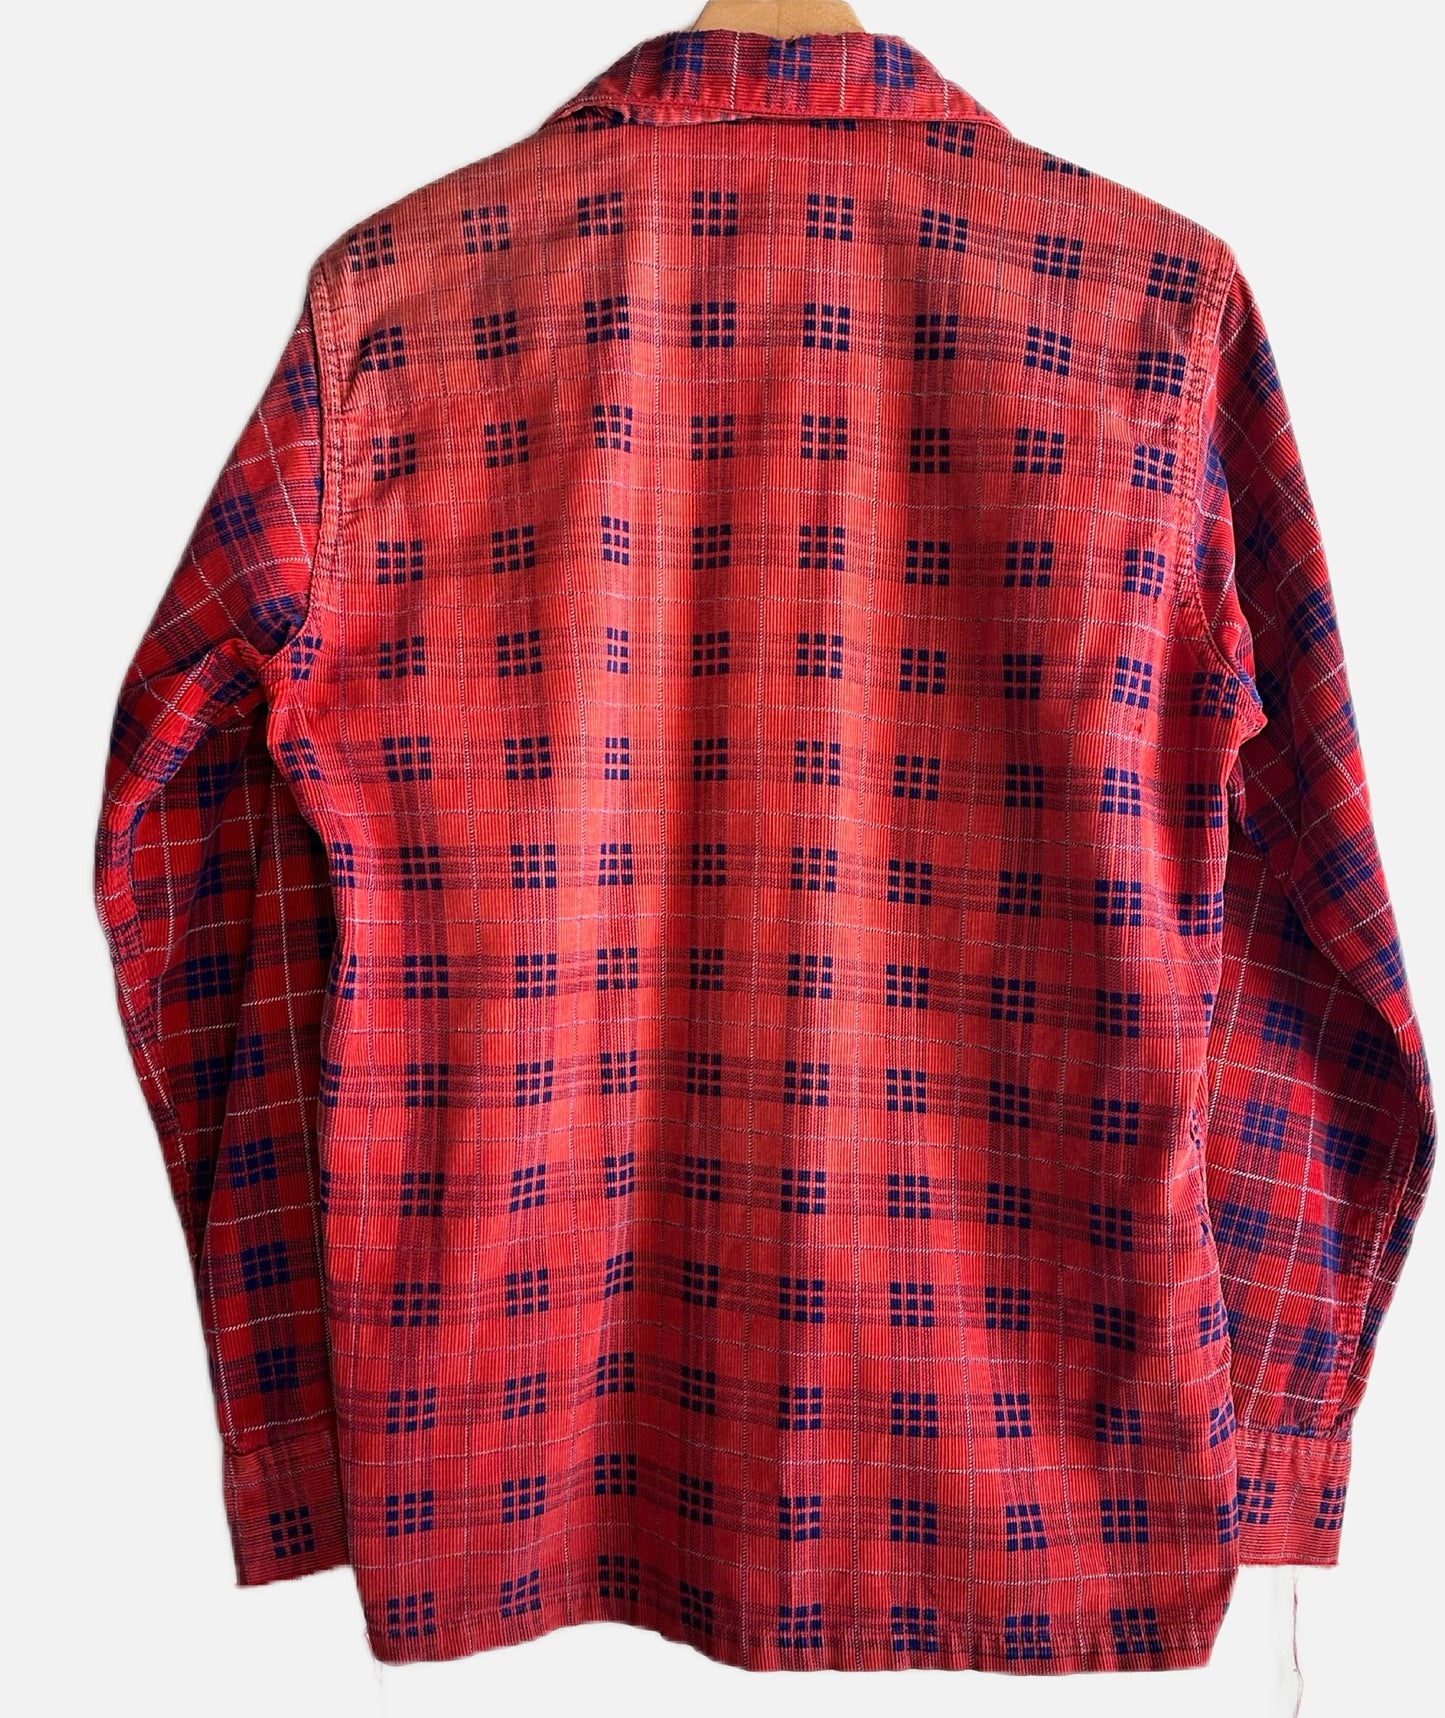 50s Corduroy Red Faded Shirt